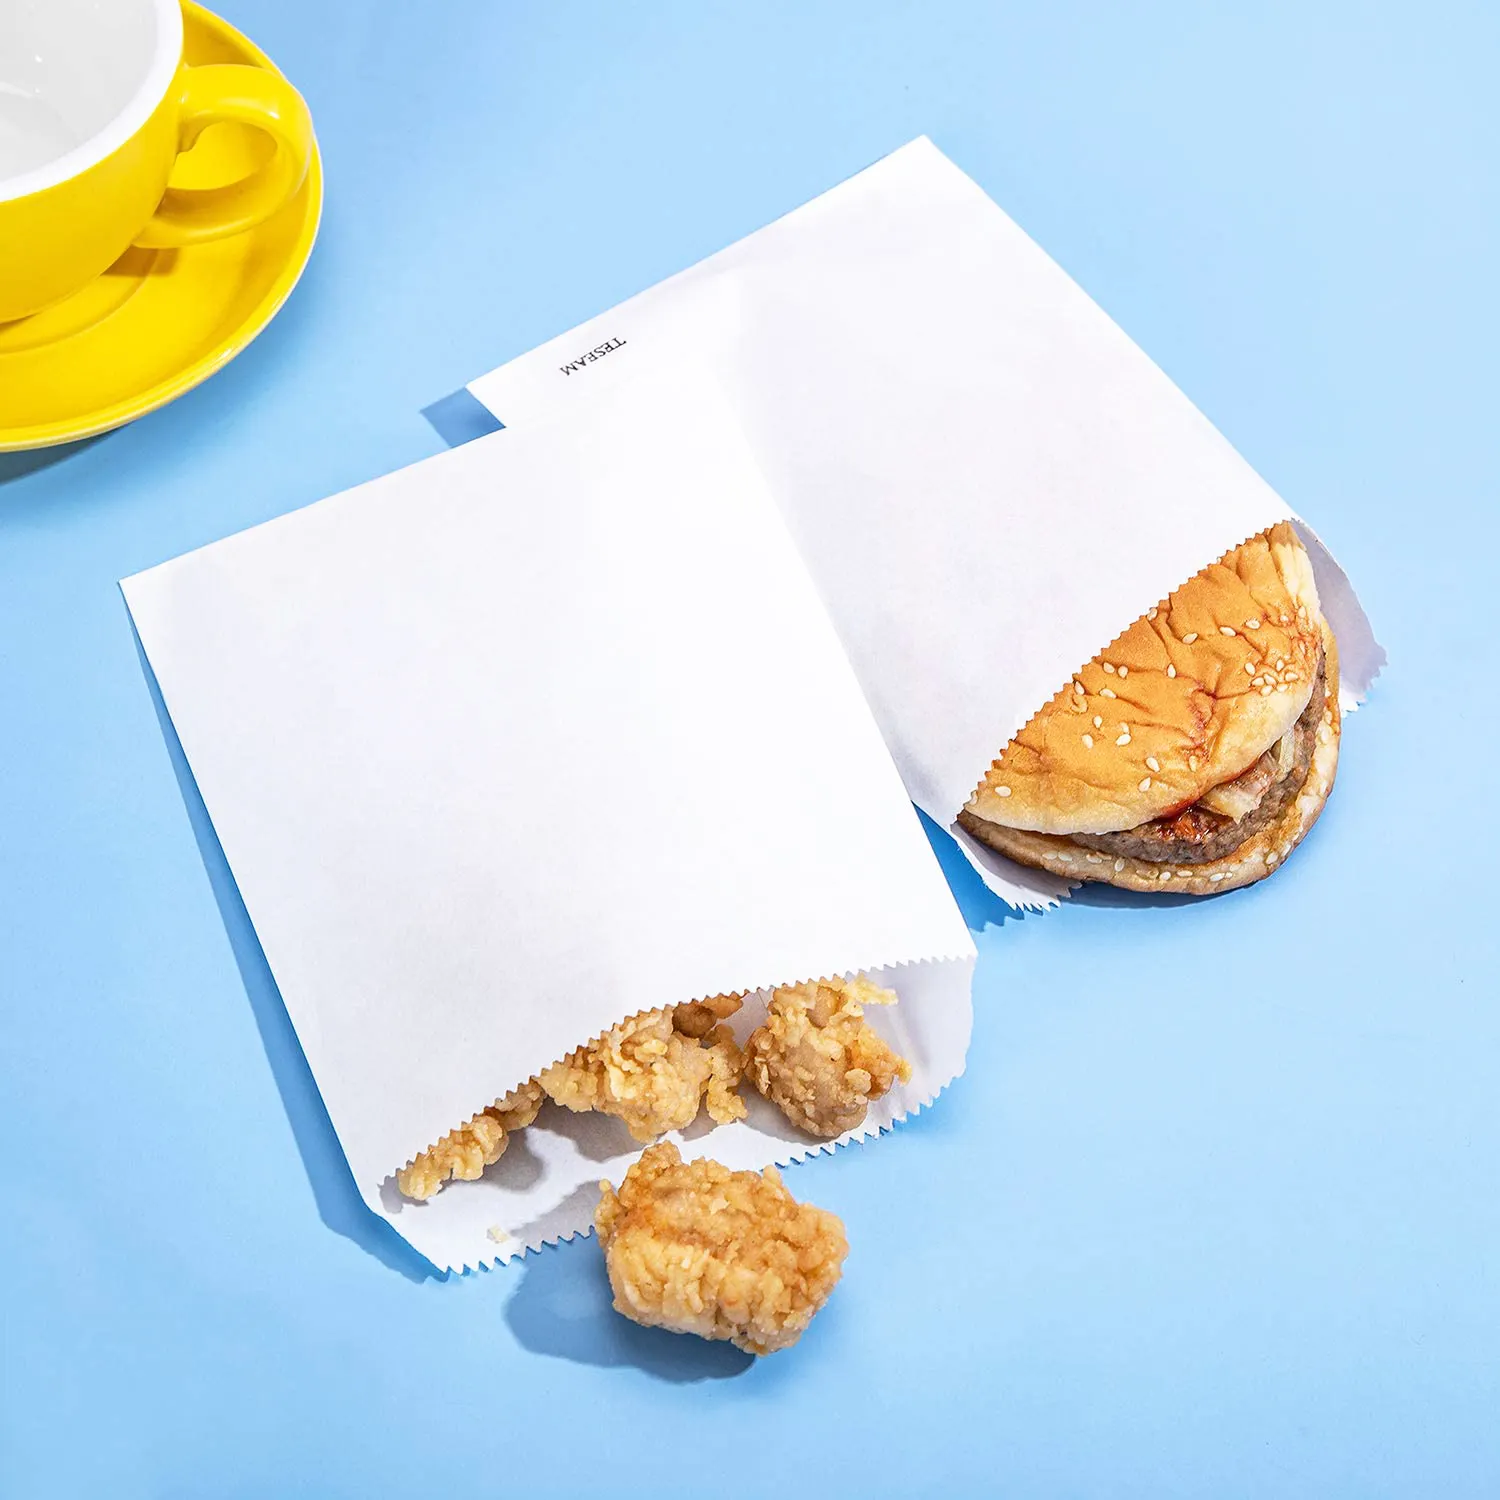 4 x 4 inch oily greasy food condiments glassine paper packaging Restaurant Take-away Baking bag